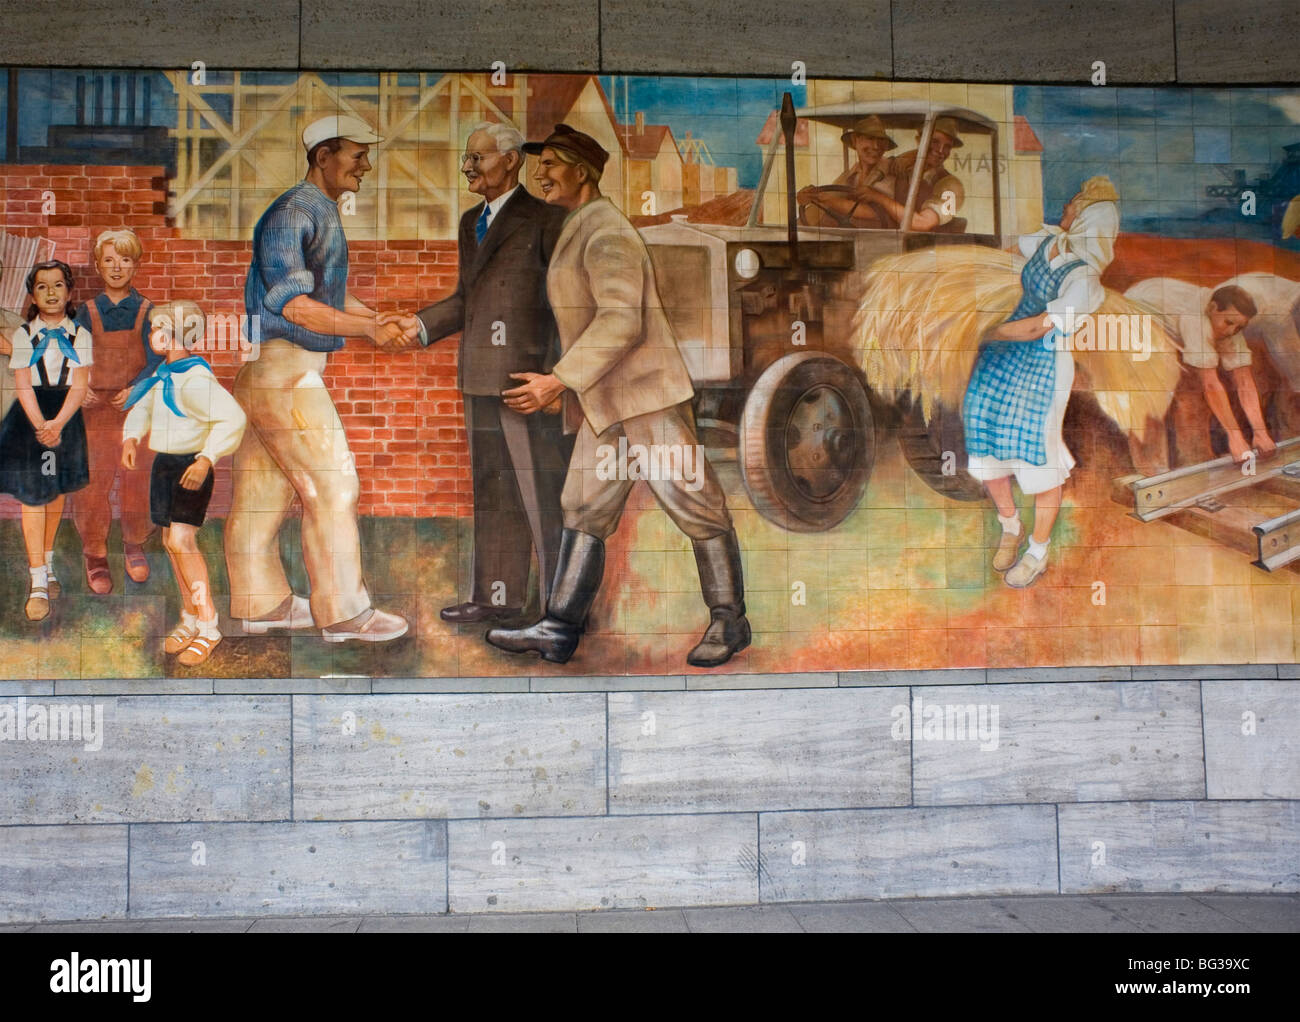 Berlin 2009 Mural Workers Socialism socialist industry soviet mass Finance peace air ministry 1989 DDR Germany Unified positive Stock Photo